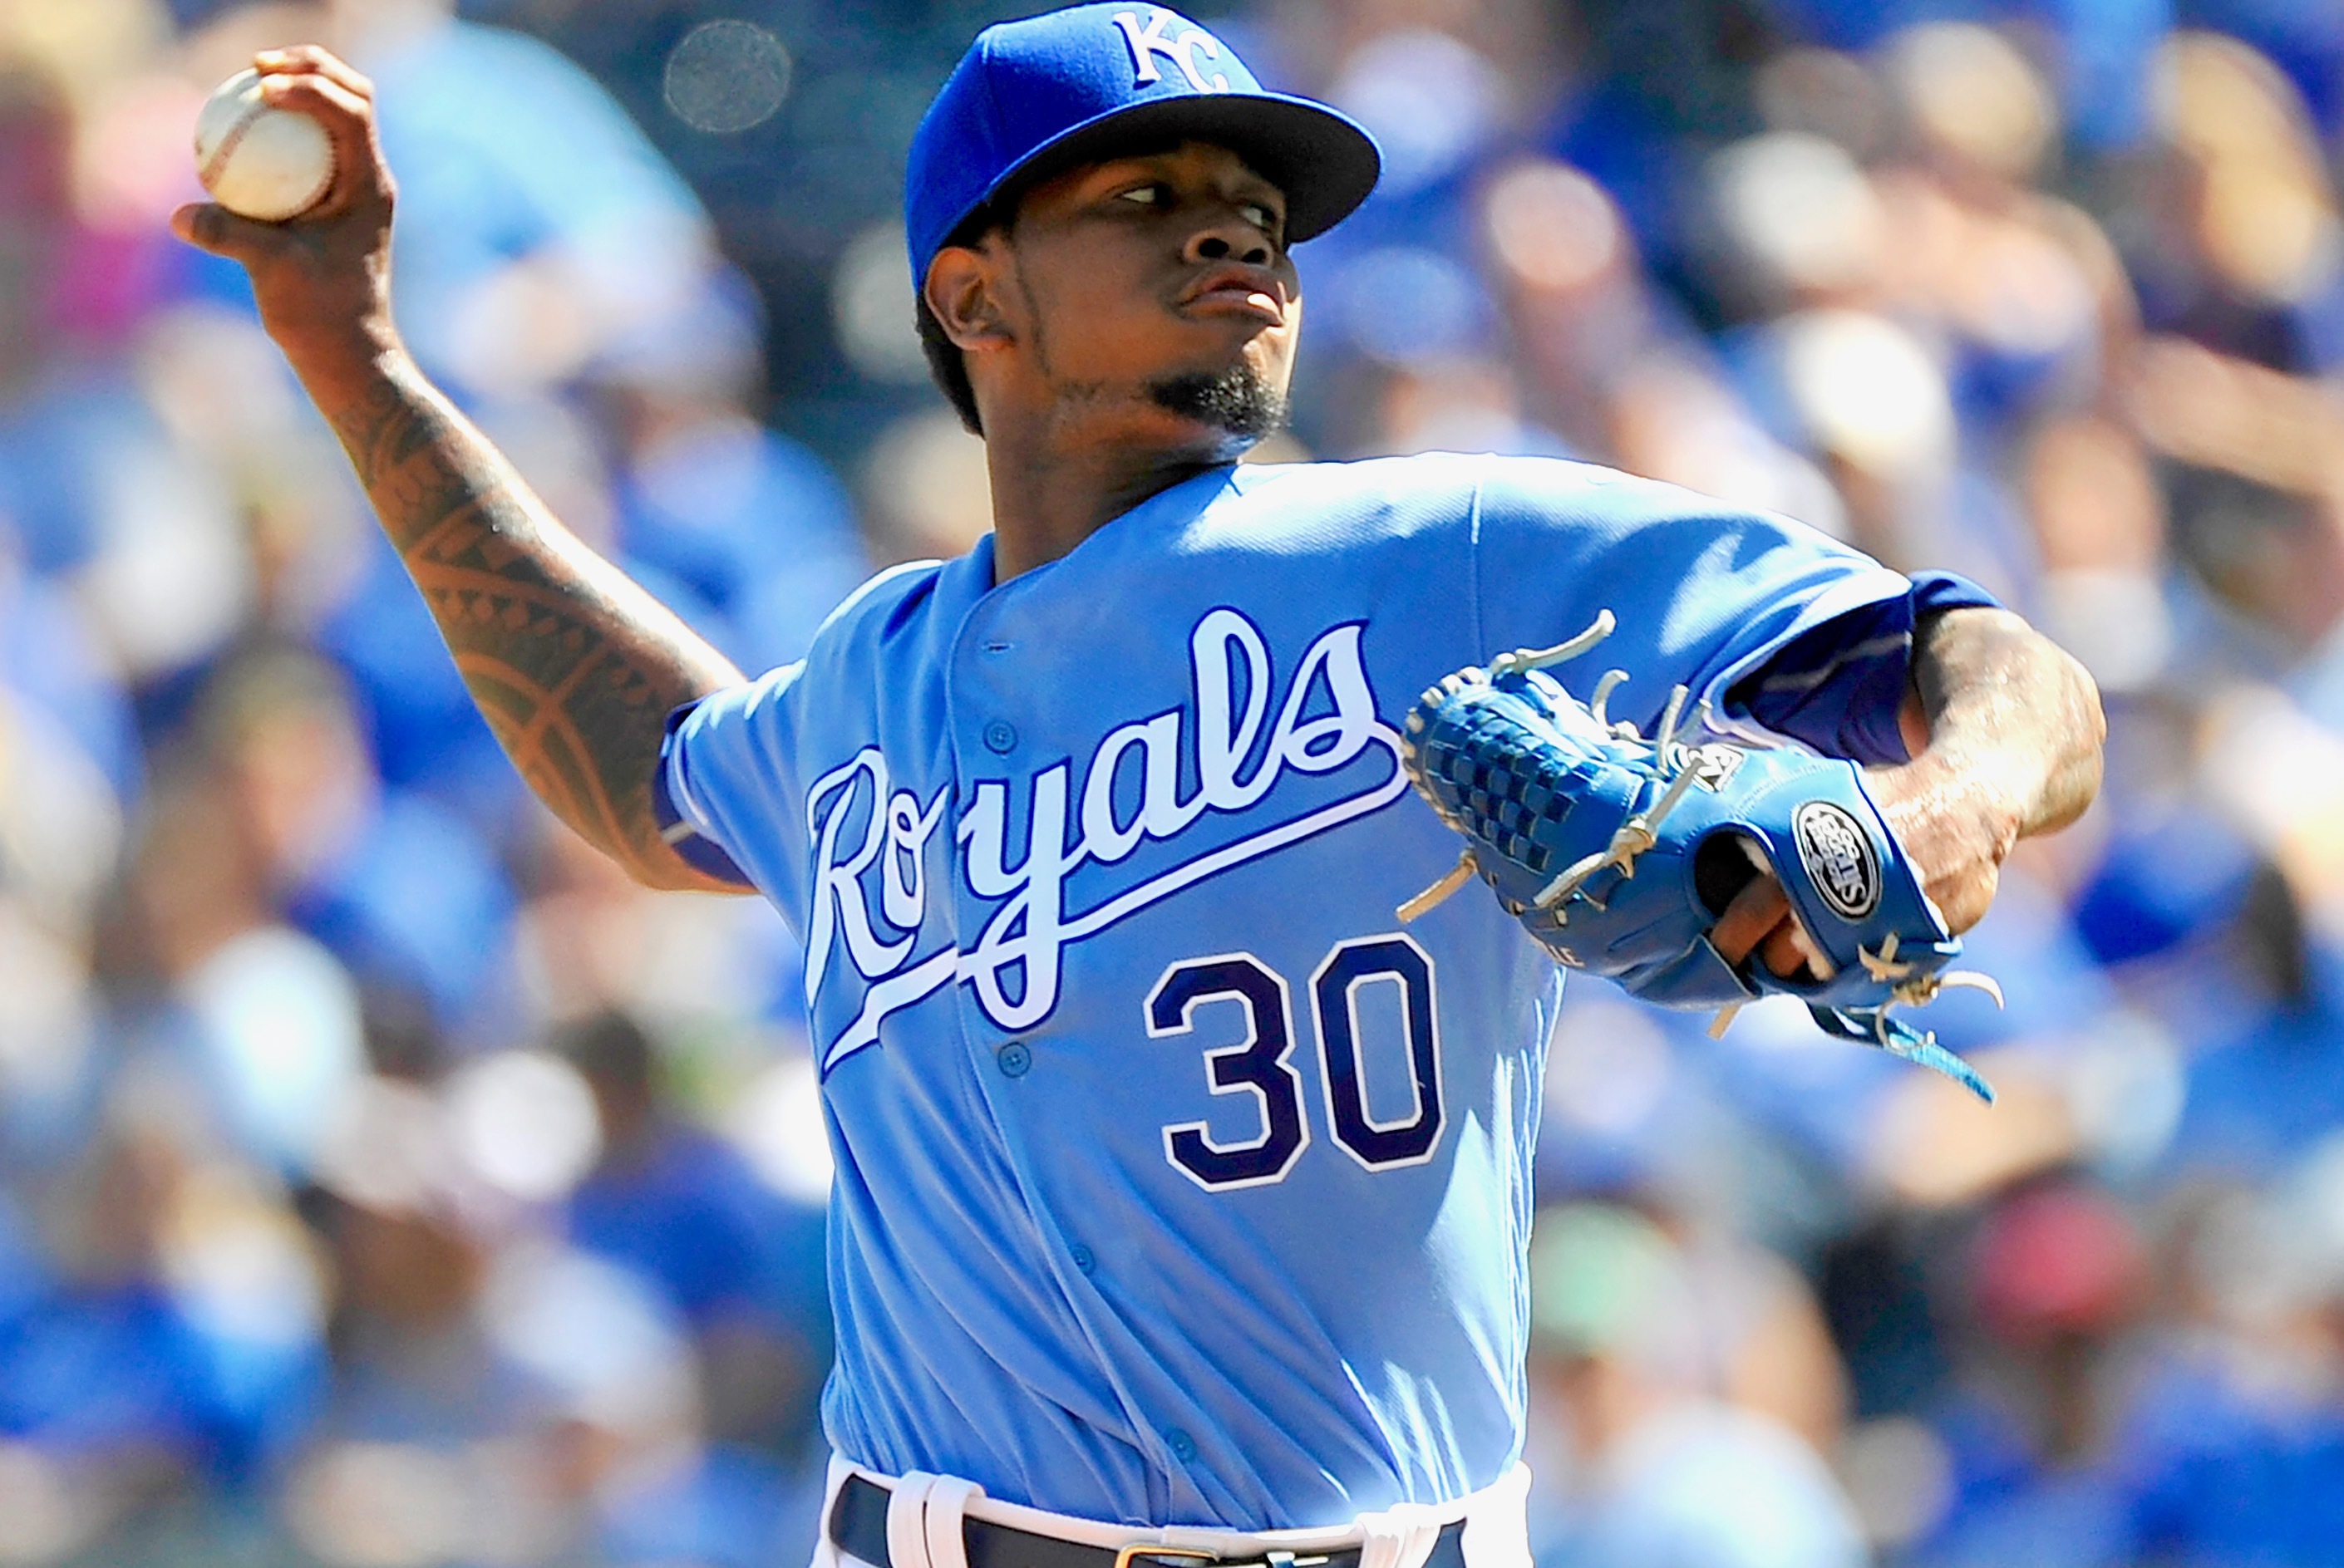 Enormous Void Where Yordano Ventura's Passion and Laughter Once